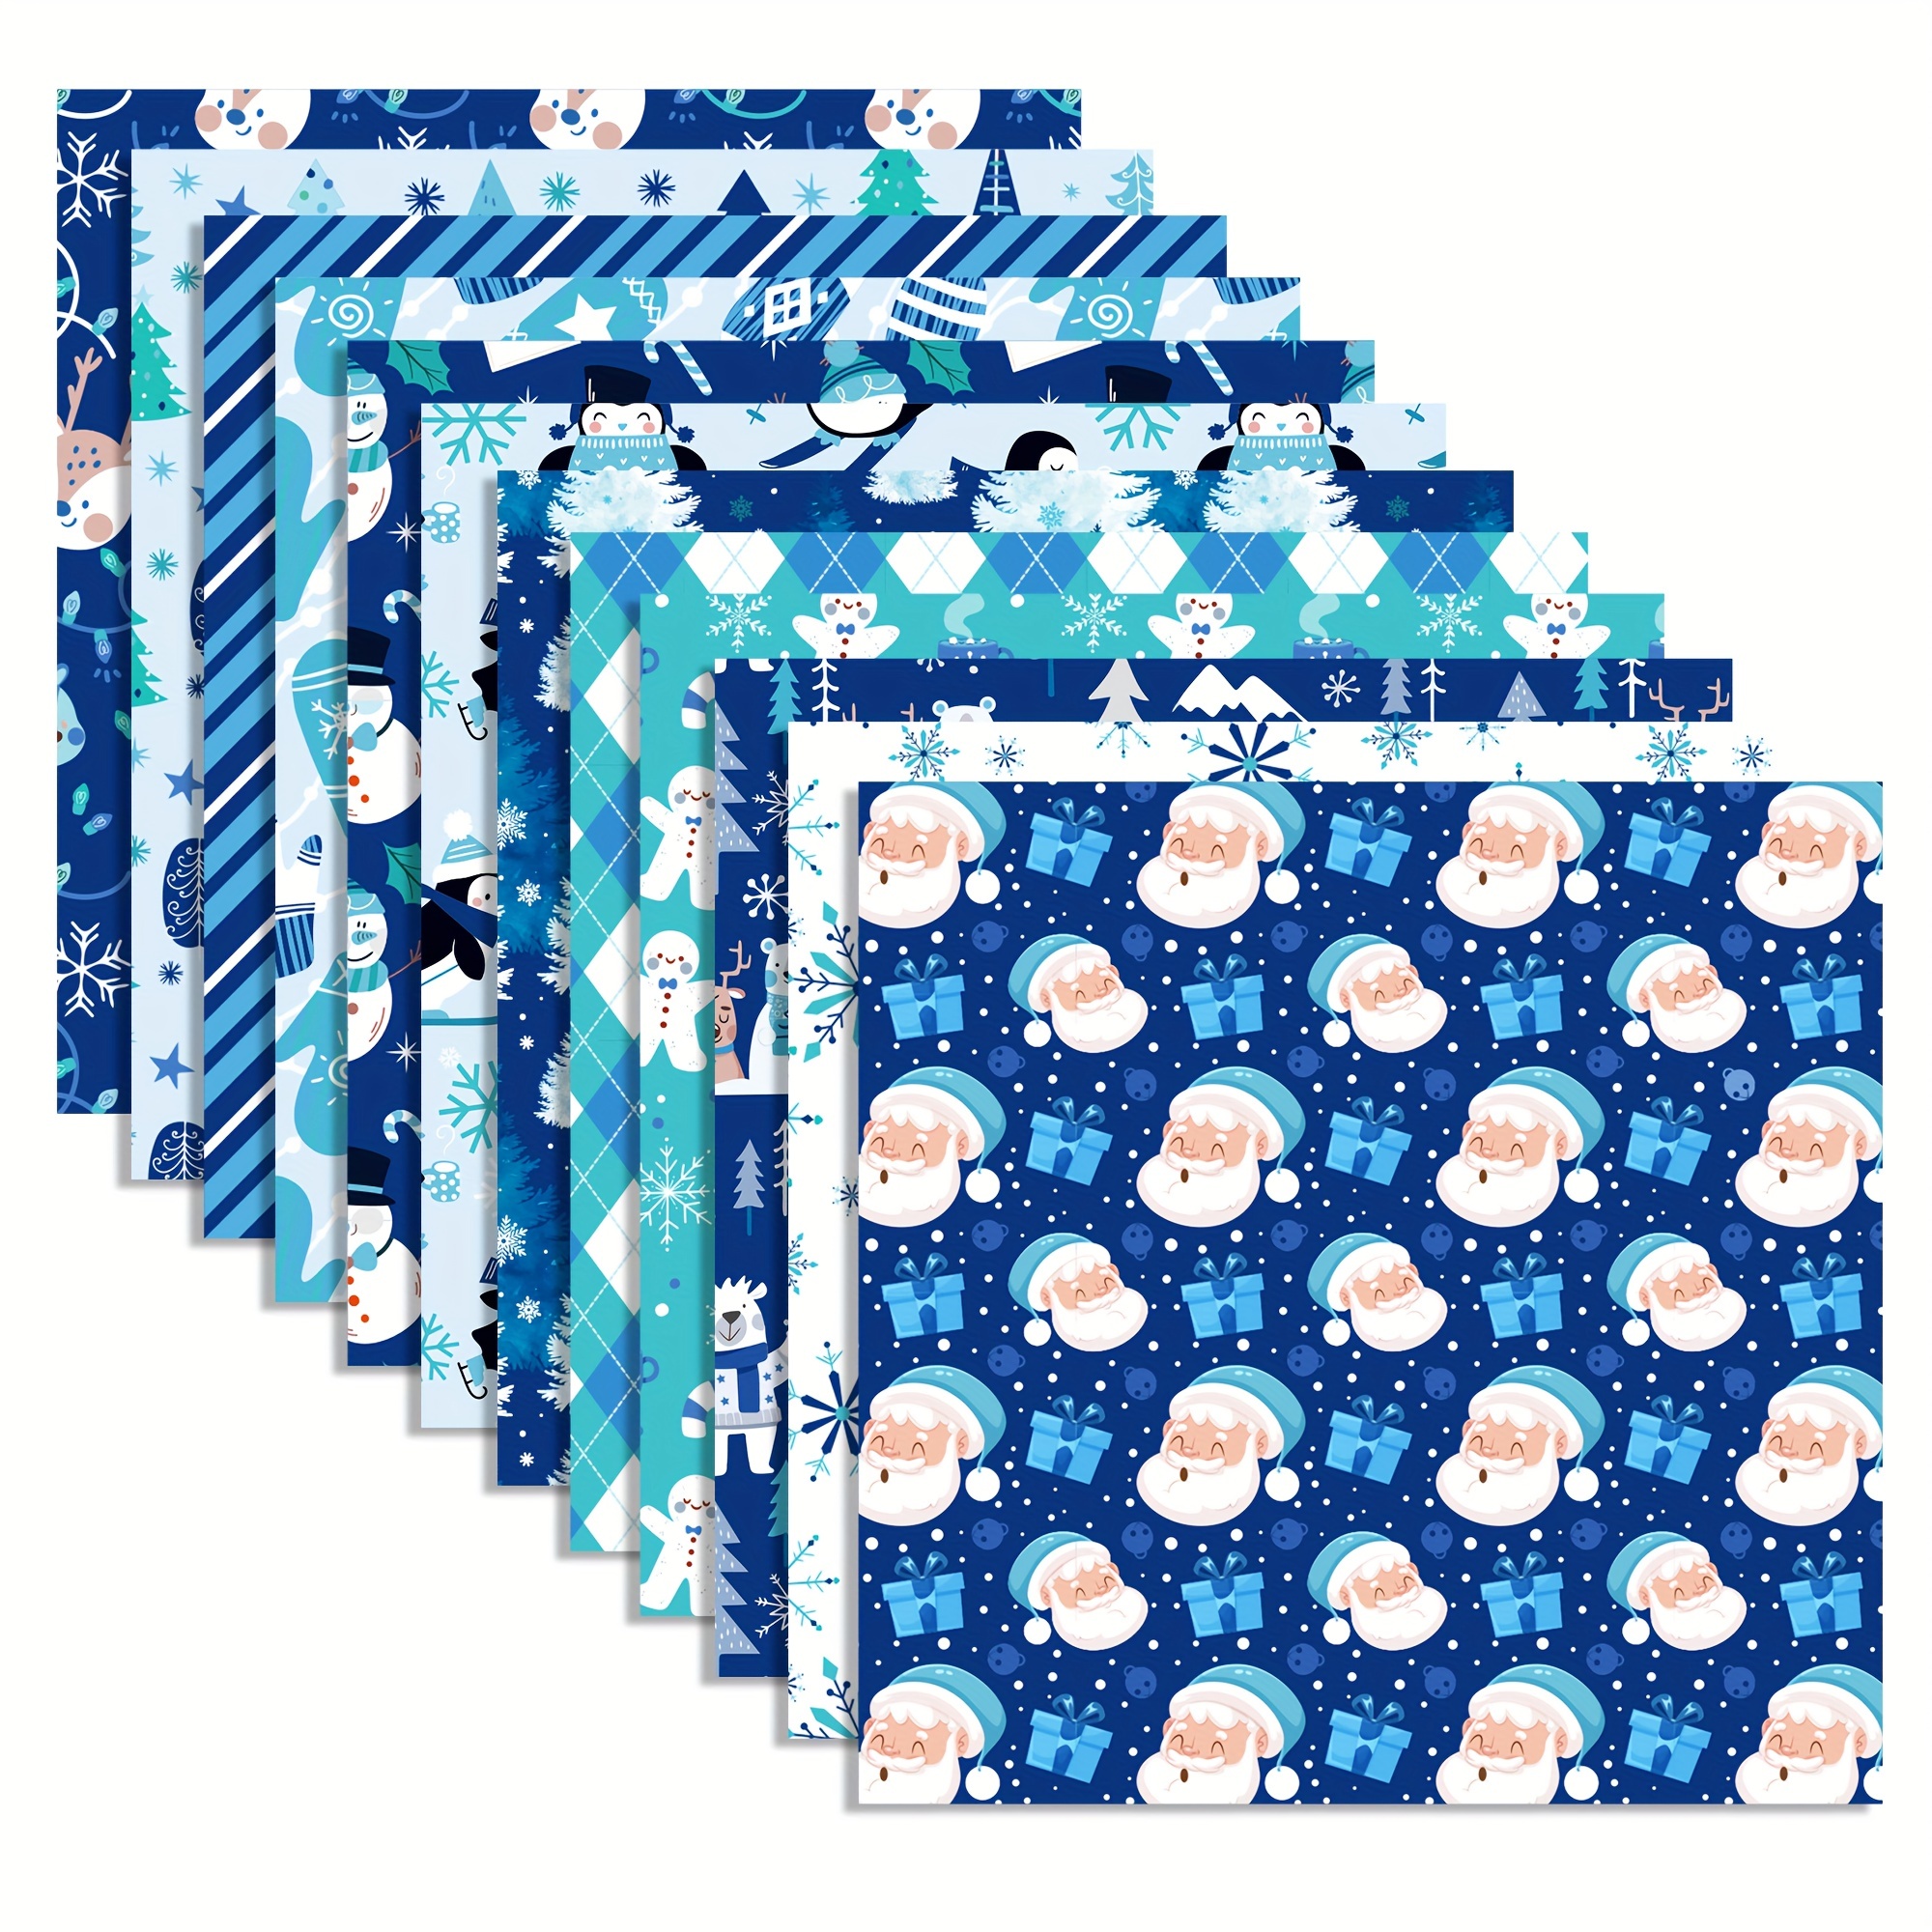 Winter Scrapbook Paper: Double-Sided Blue Pattern Sheets Designed for  Scrapbooking, DIY Projects, Crafts, Origami, and More